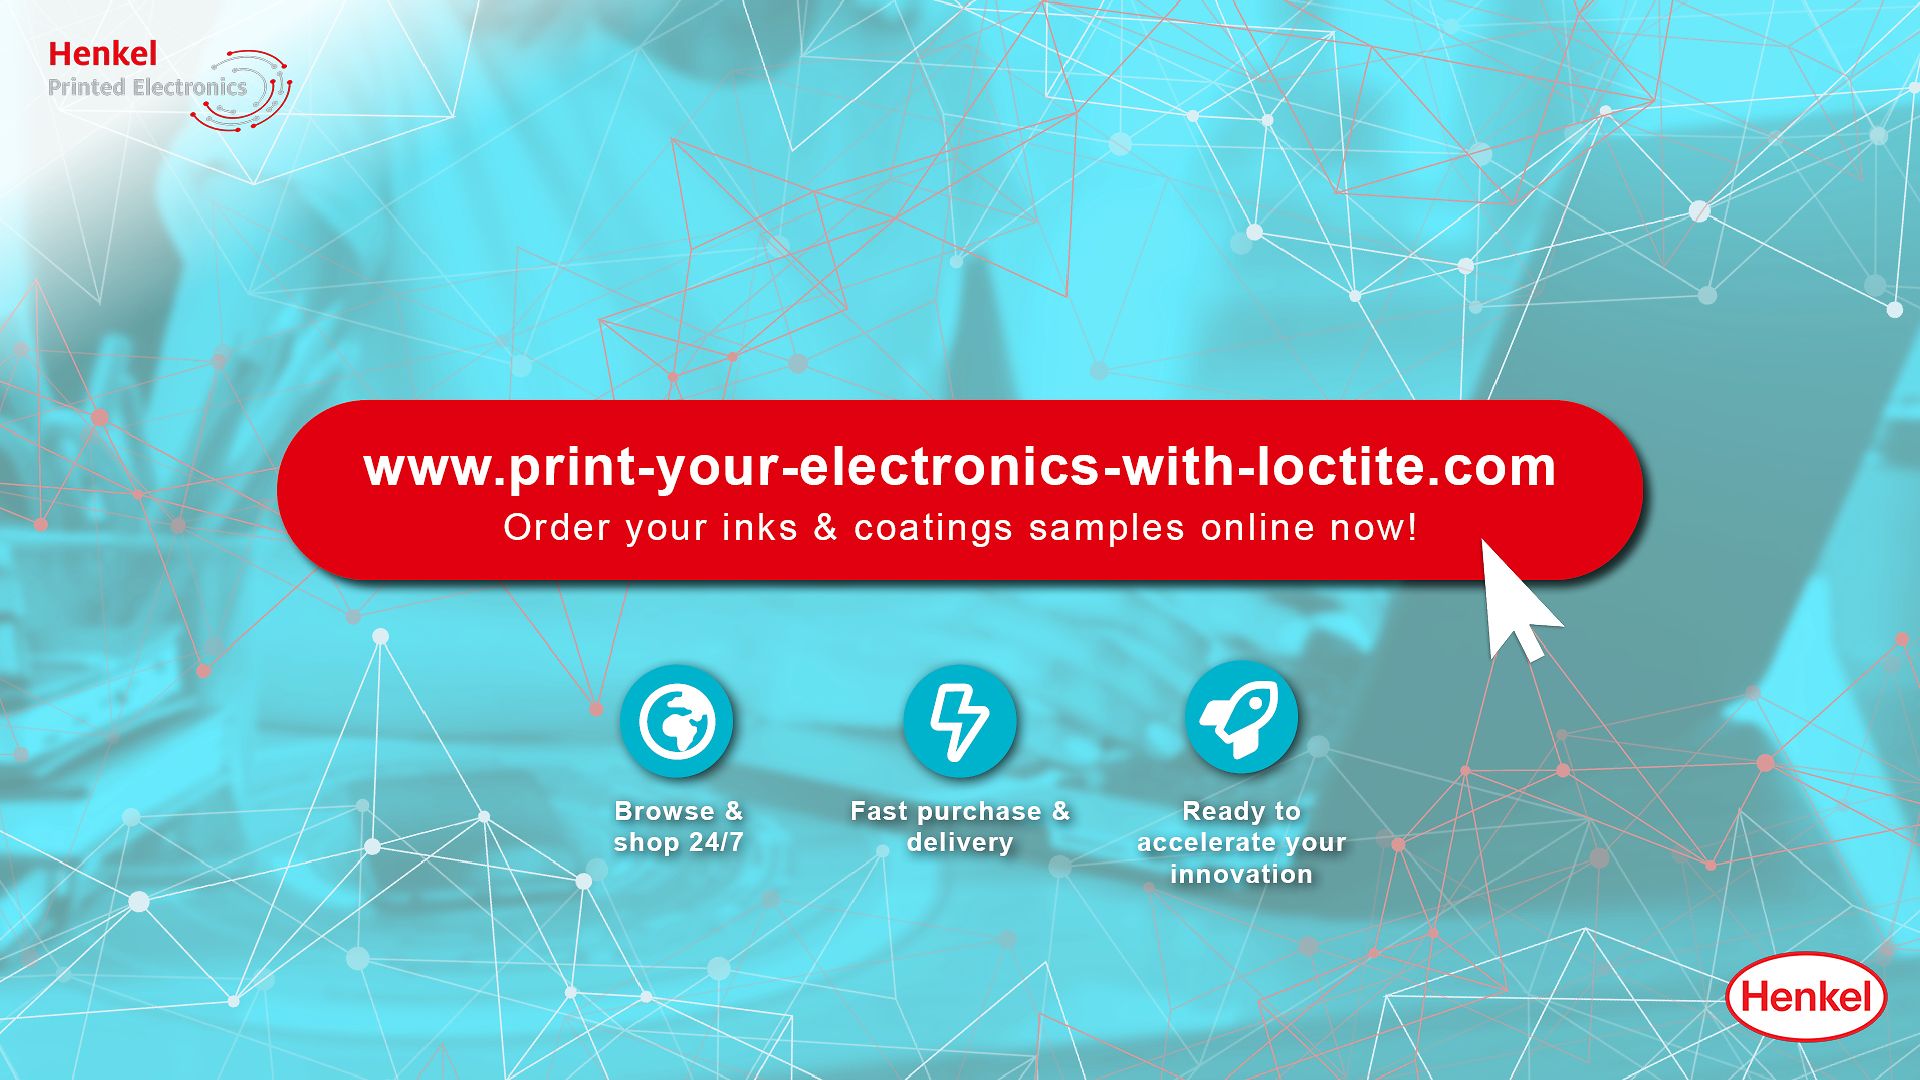 New online shop for printed electronics under www.print-your-electronics-with-loctite.com